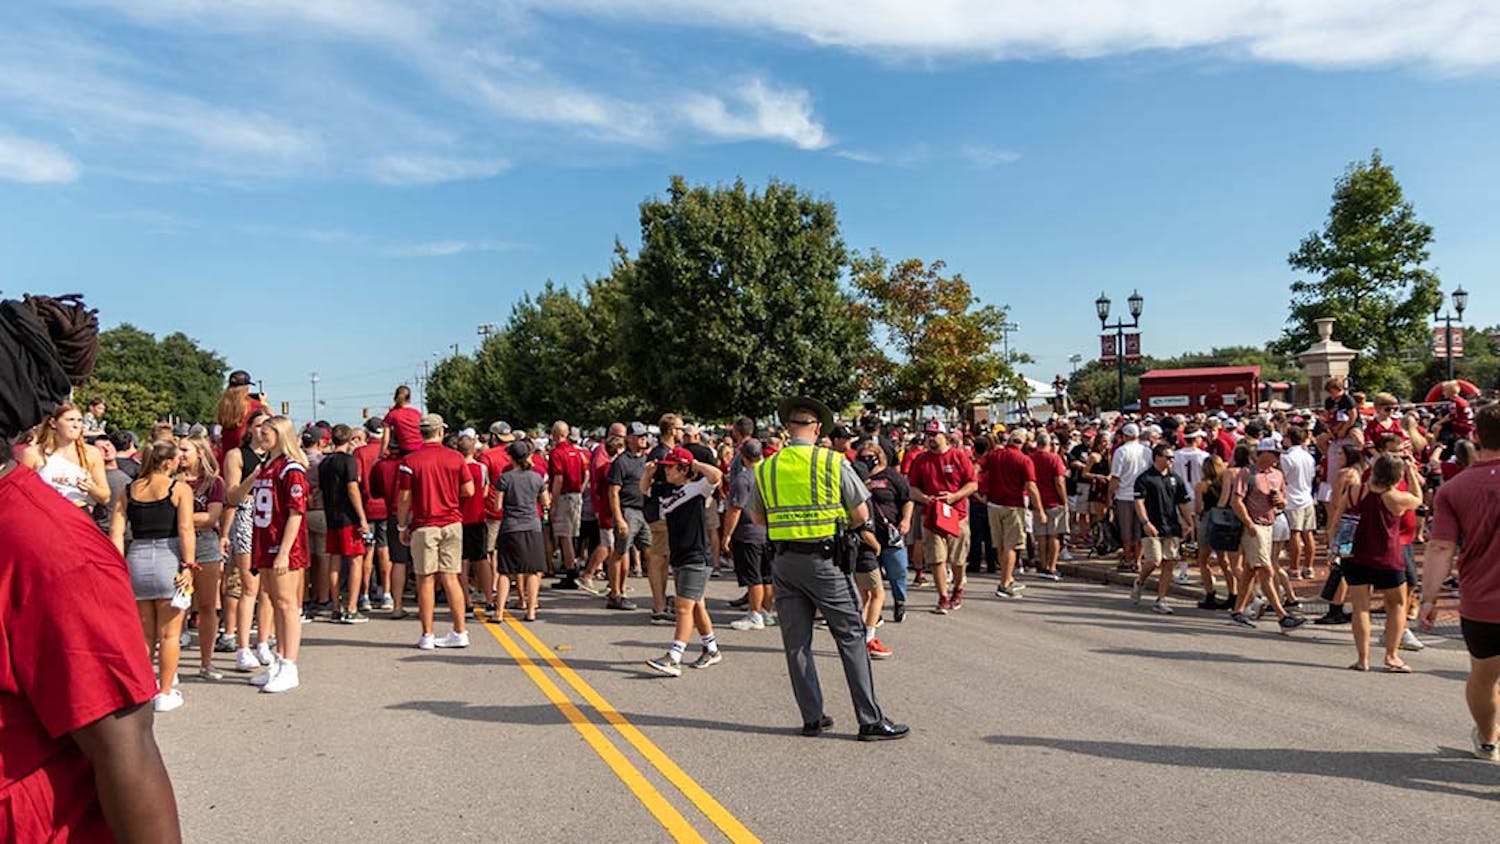 FILE — Gamecock fans lined up for the Gamecock Walk through Gamecock Park to Williams-Brice Stadium on Sept. 5, 2021. Gamecock Walk stretches across Bluff Rd and requires it to be temporarily shut down by local law enforcement.